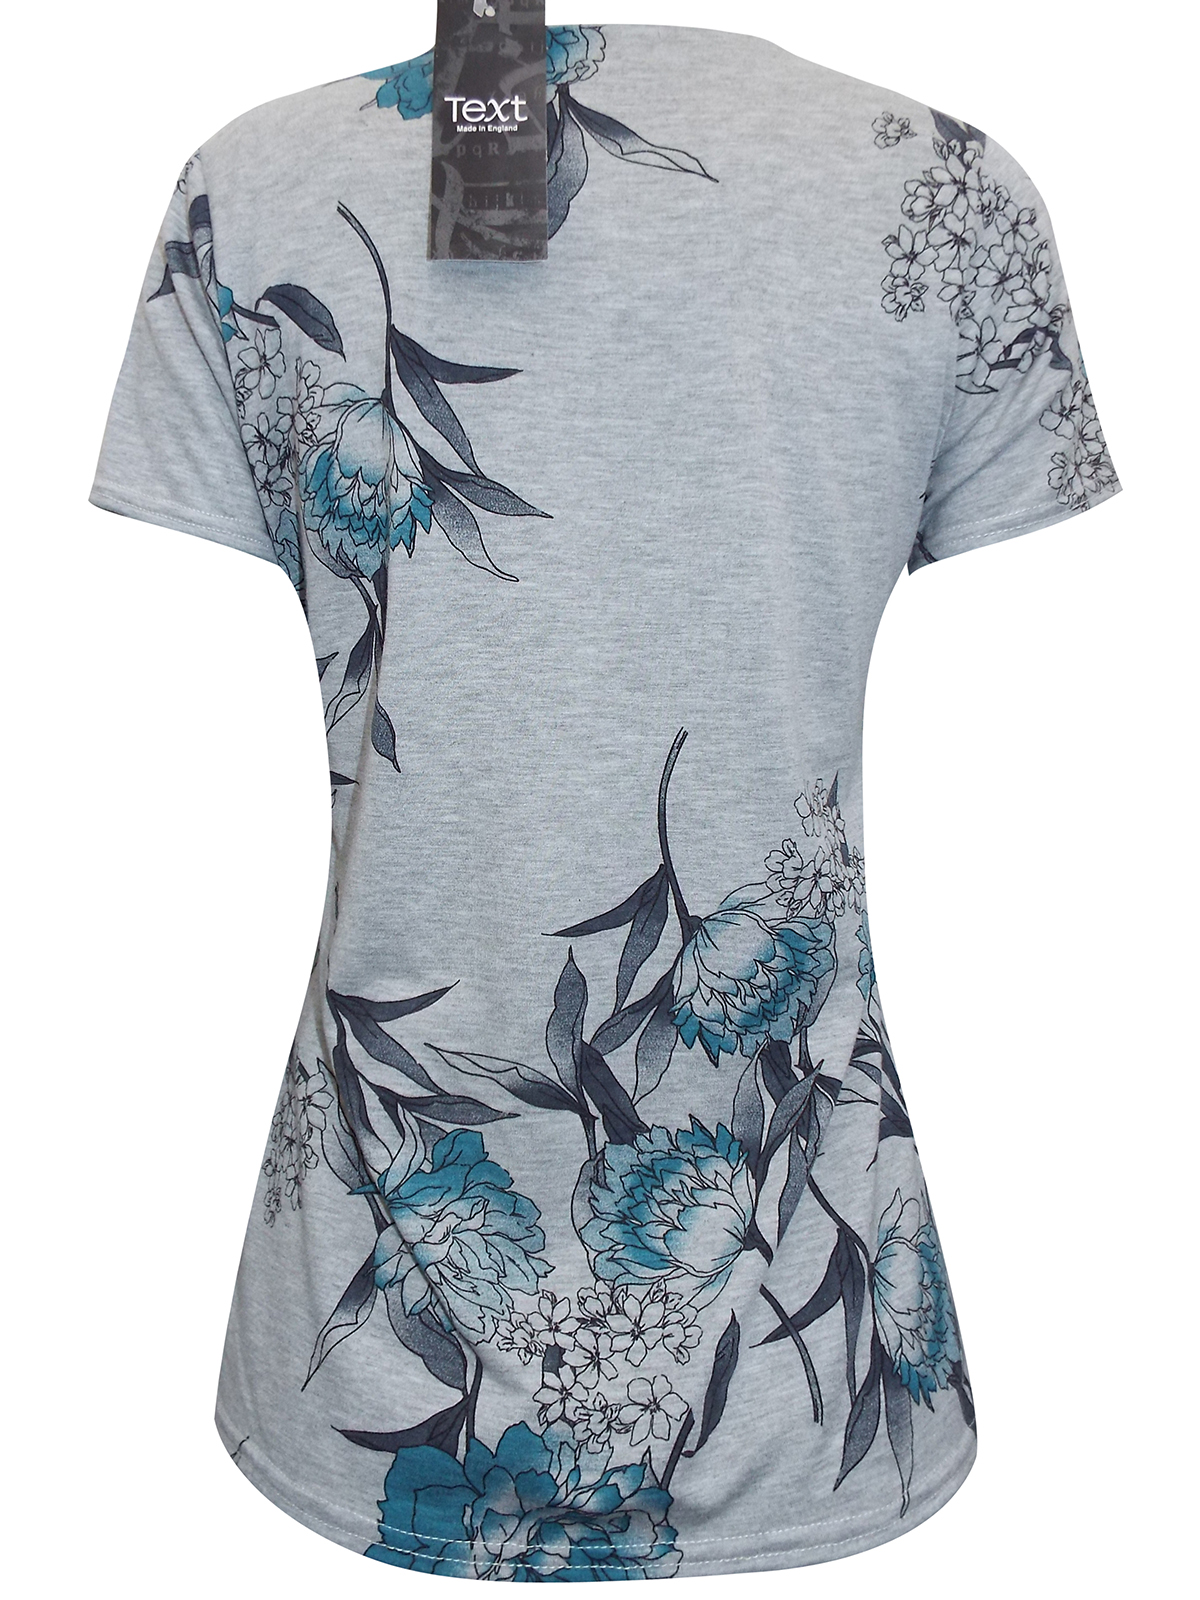 //text.. - - Text GREY Floral Short Sleeve Crew Top - Size 12 to 14 ...